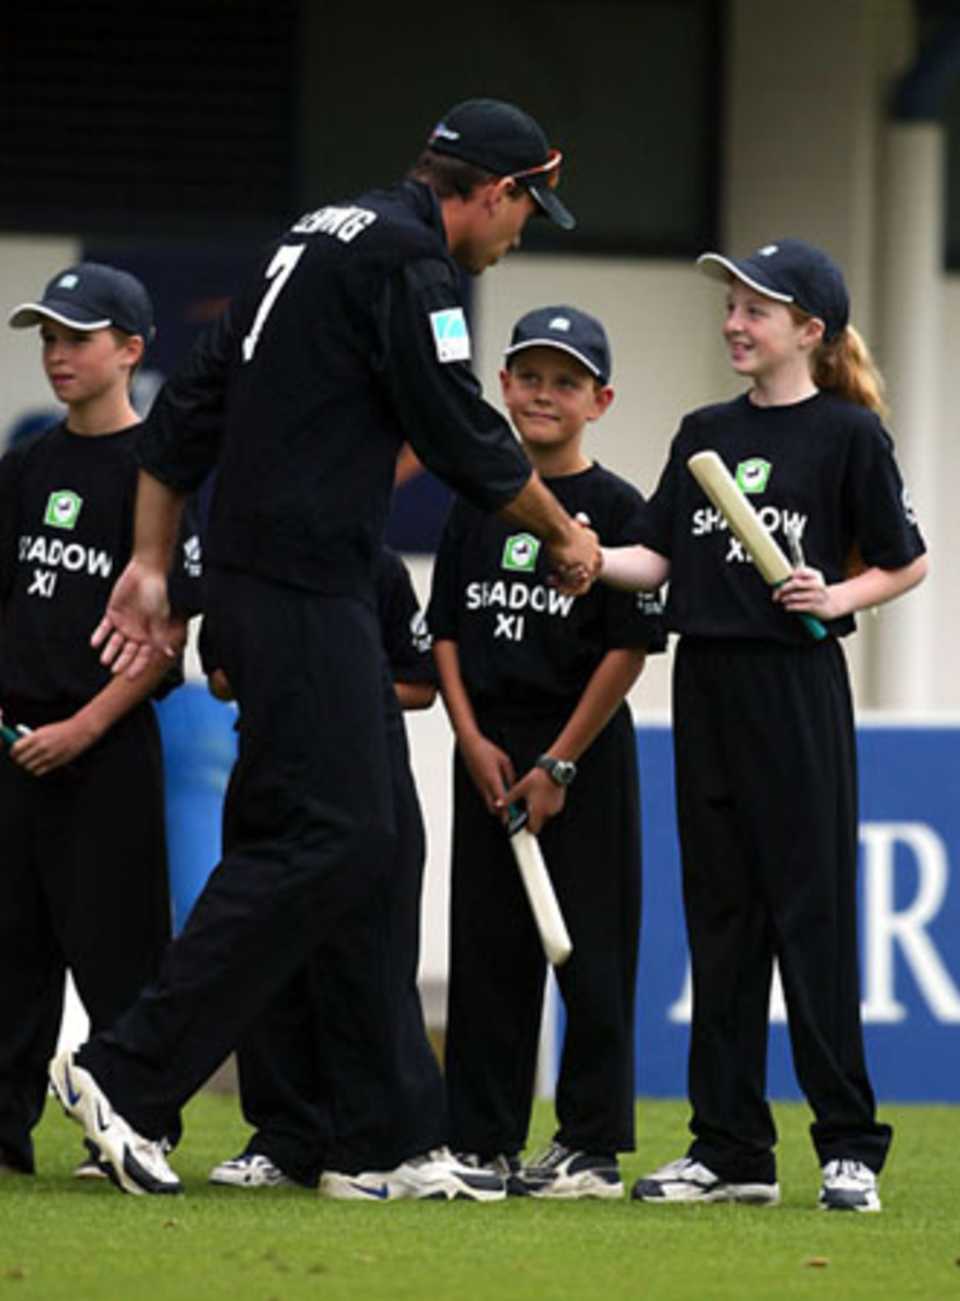 New Zealand captain Stephen Fleming shakes hands with members of the Shadow XI as his team walks on to the field. The Shadow XI receive a signed bat from a designated CLEAR Black Cap player before returning to free seats in the crowd. 3rd ODI: New Zealand v England at McLean Park, Napier, 20 February 2002.